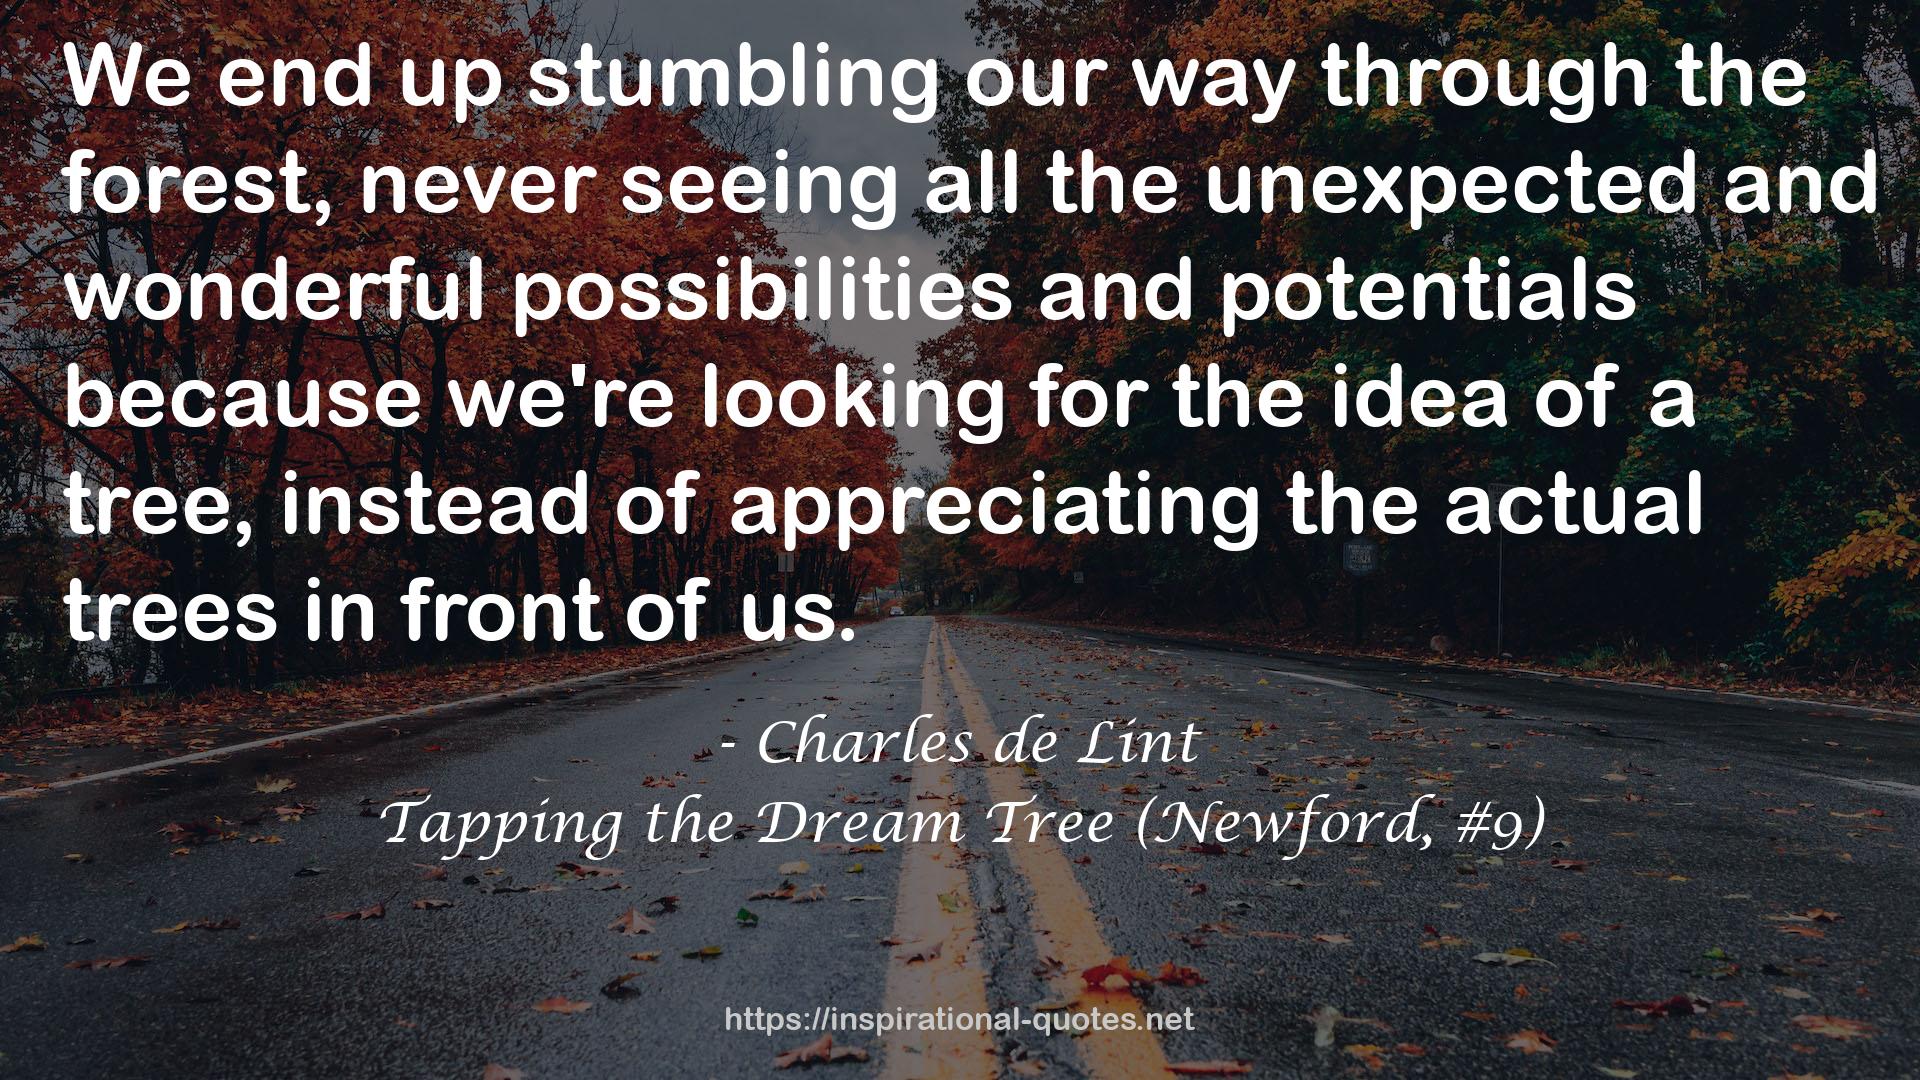 Tapping the Dream Tree (Newford, #9) QUOTES